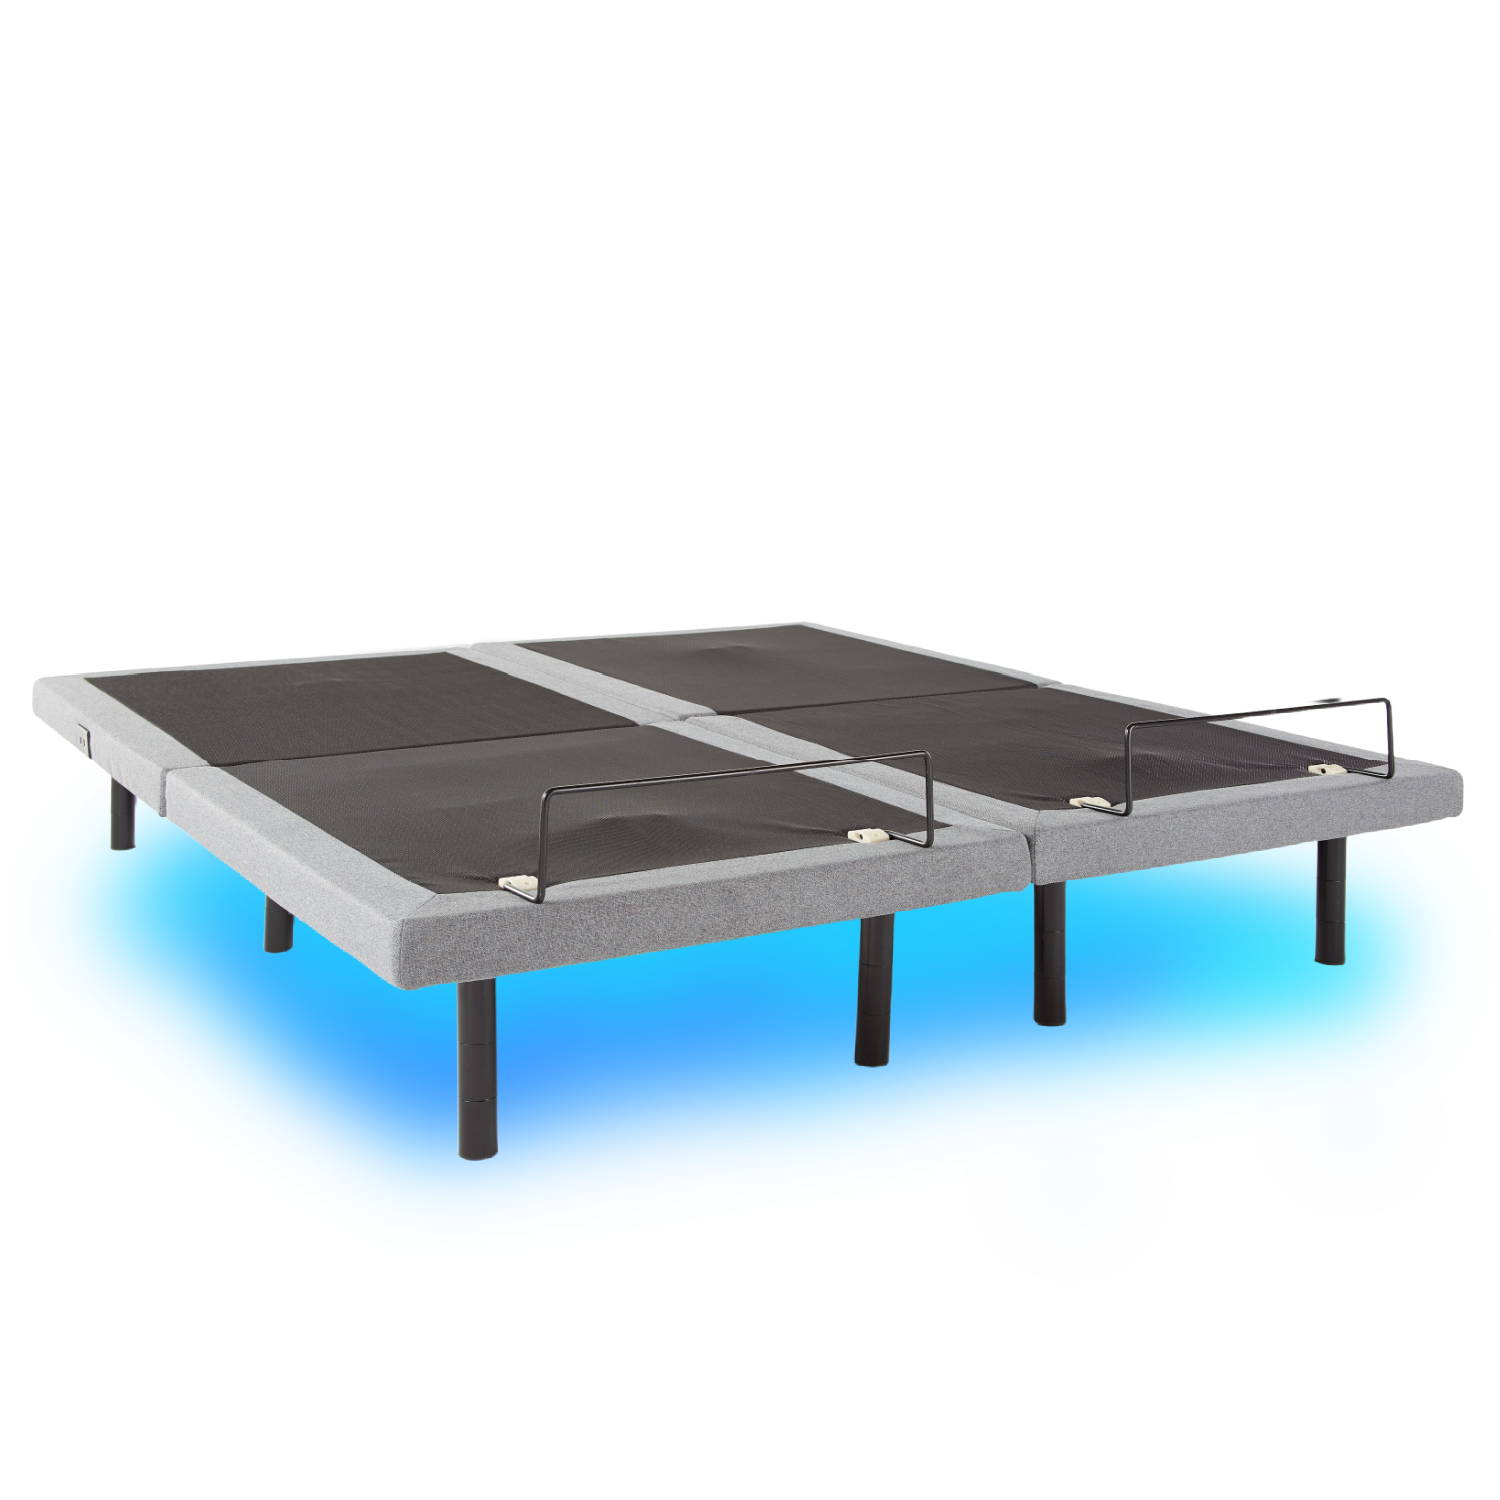 Stay safe int he night with underbed lighting for convenience while using her adjustable base.